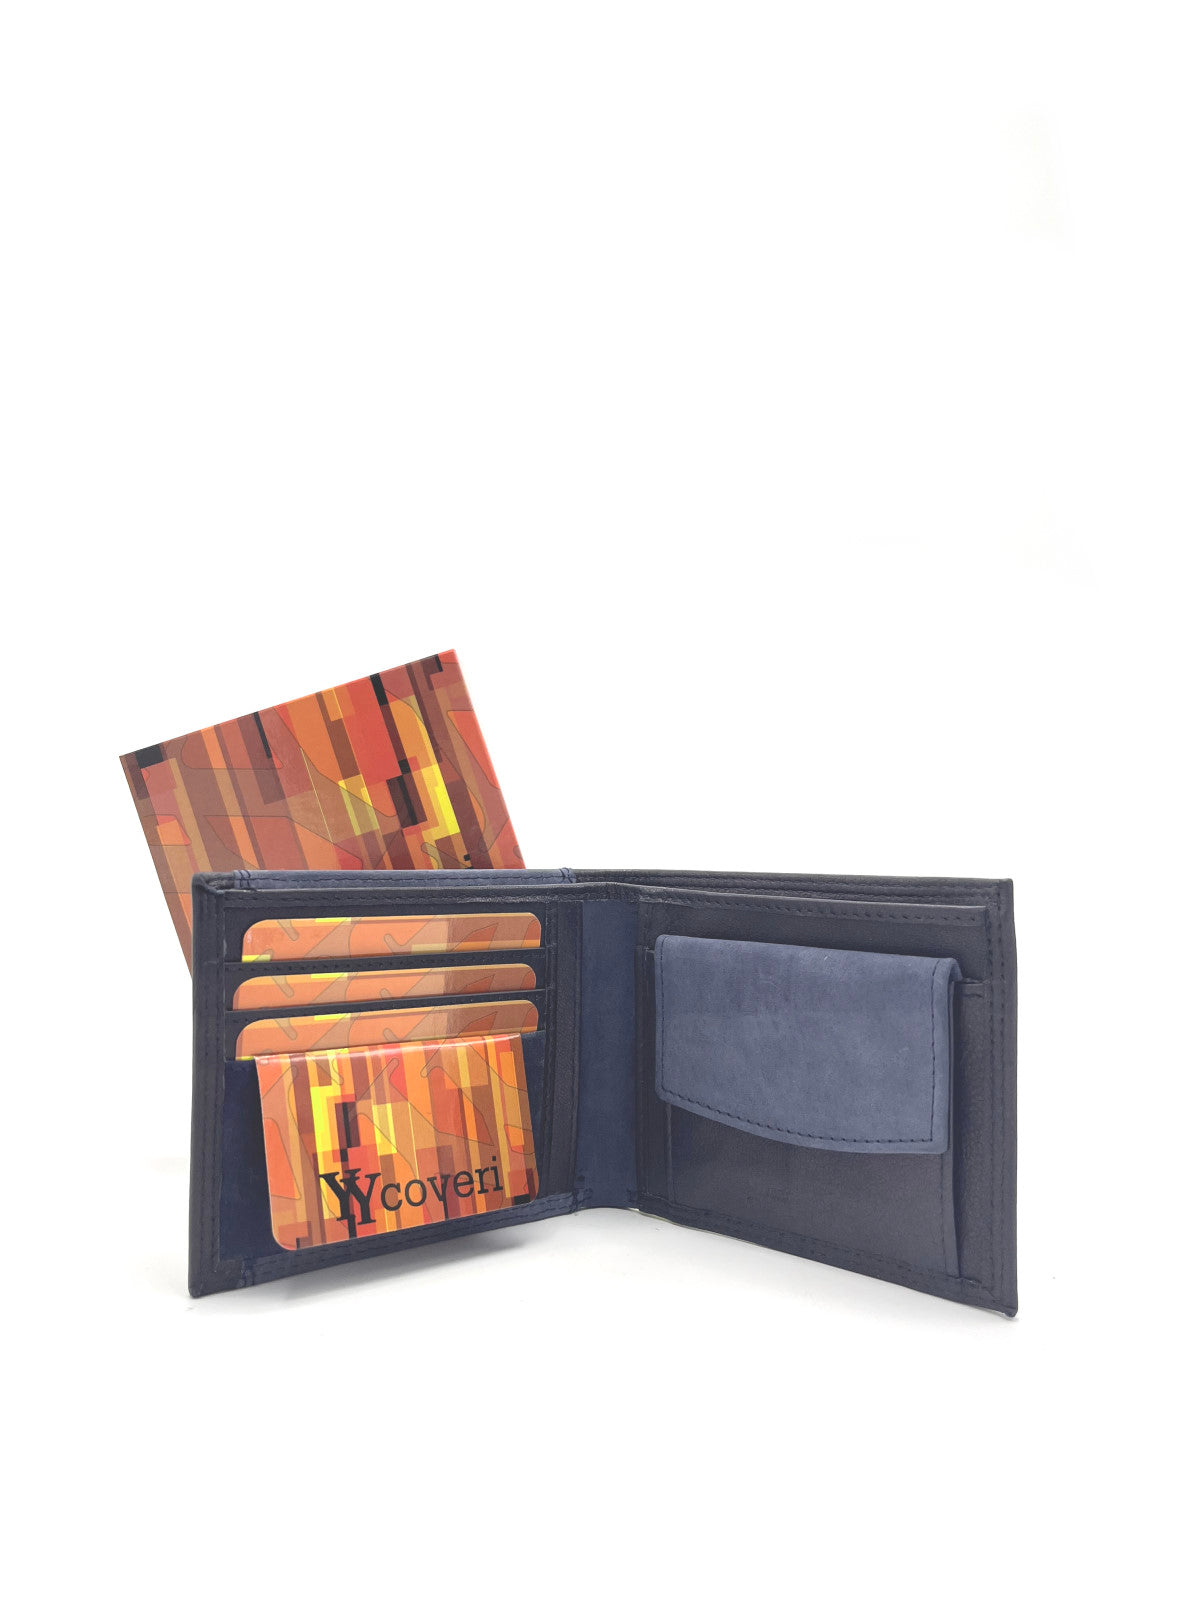 Genuine leather wallet for men, Brand You Young Coveri, art. NEPI1144.422